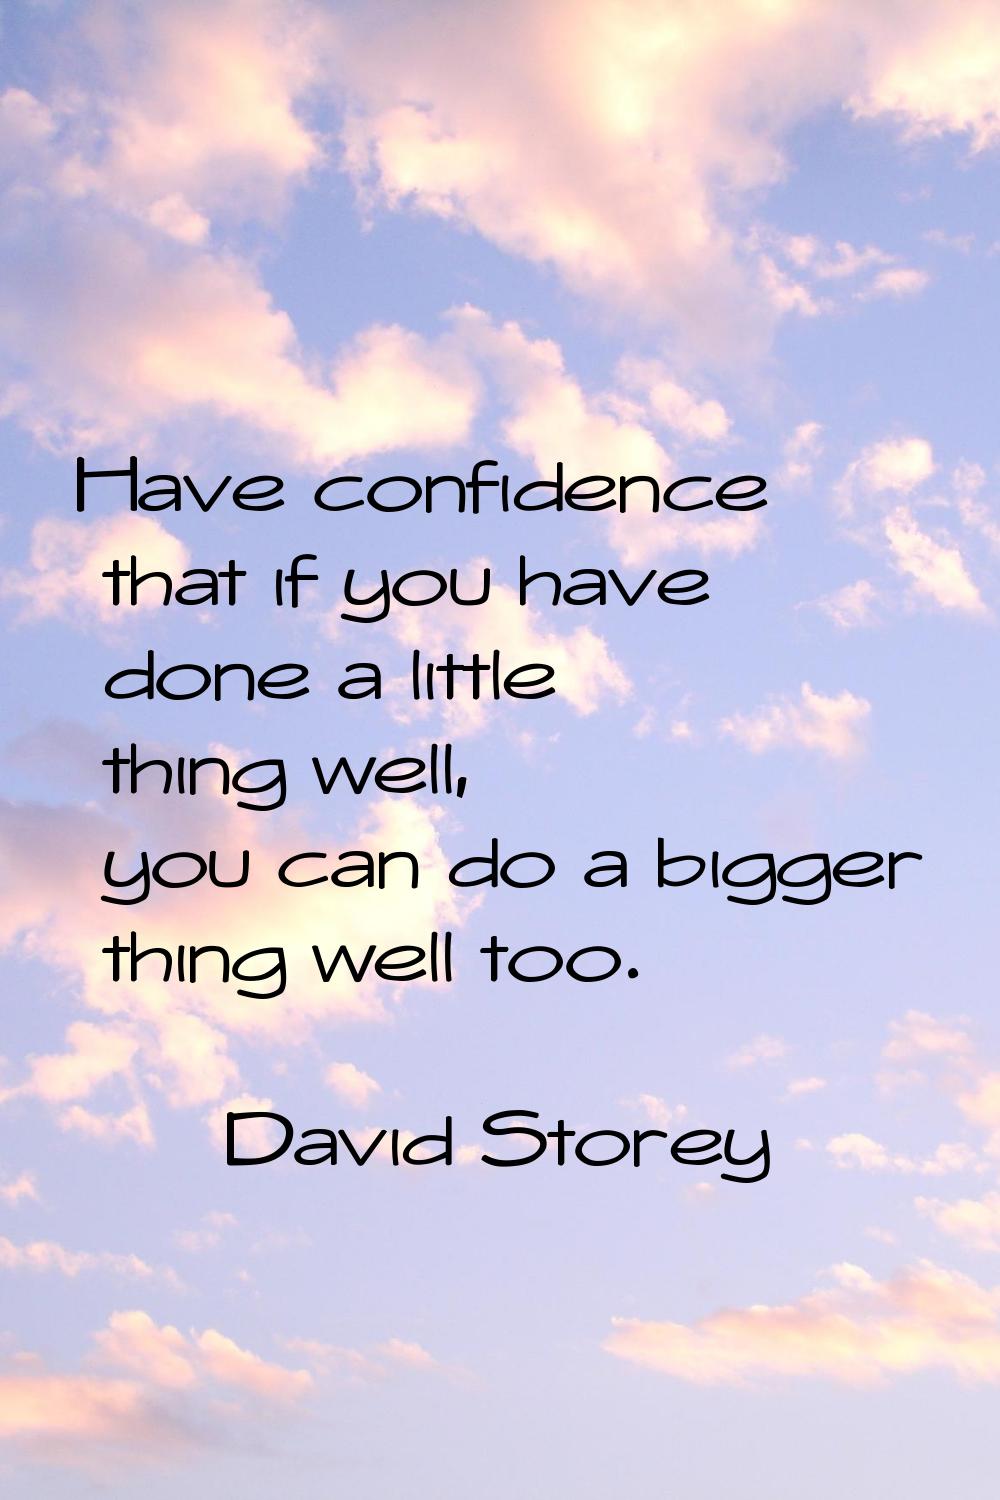 Have confidence that if you have done a little thing well, you can do a bigger thing well too.